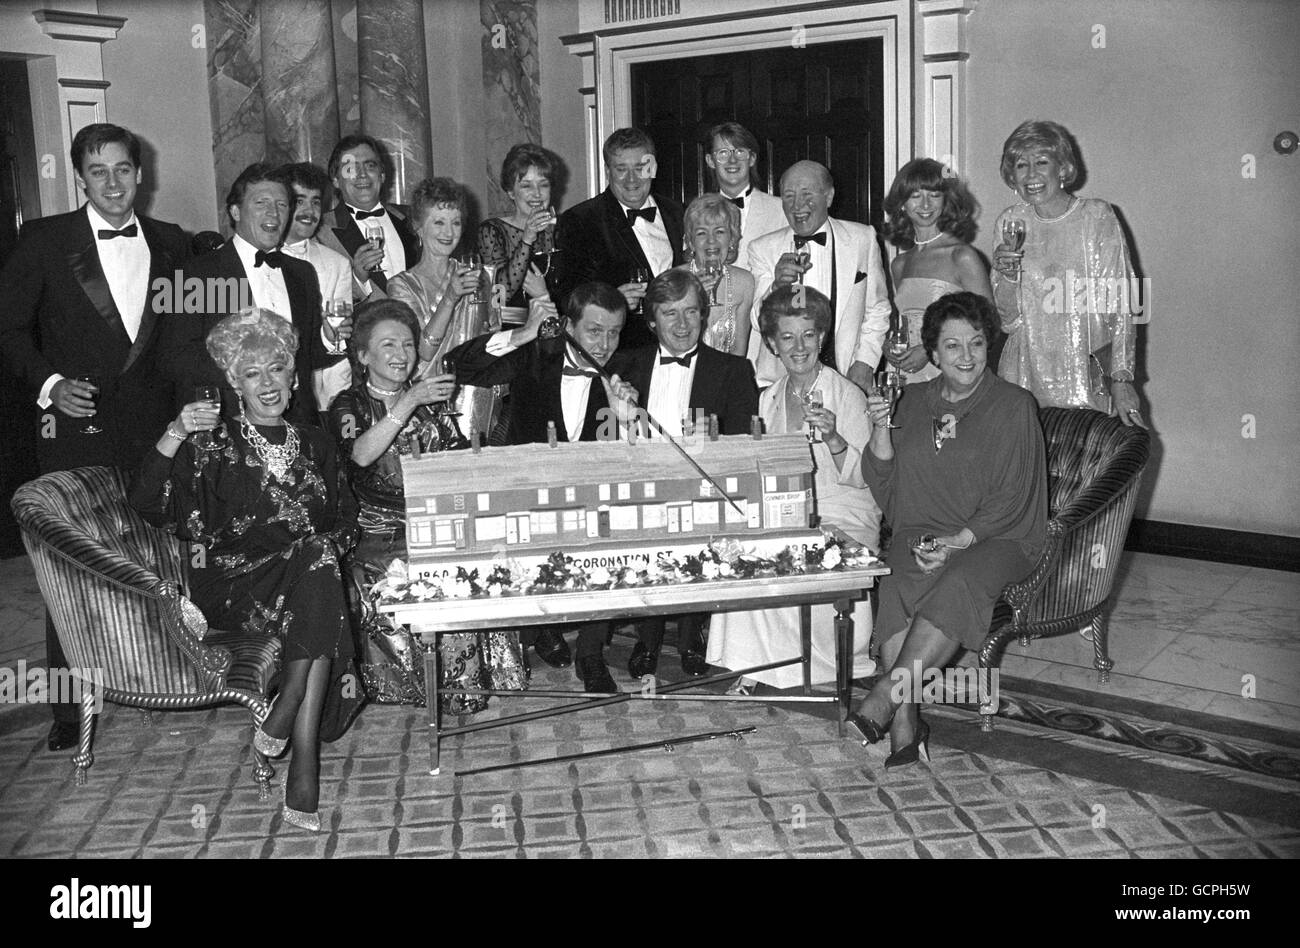 Members of the cast of ITV's soap opera Coronation Street, crowded around a cake replica of the street at the celebration to mark its 25th anniversary at the Dorchester Hotel. Front row, left to right, Julie Goodyear, Eileen Derbyshire, series creater Tony Warren, William Roache, Jean Alexander and Betty Driver. Back row, left to right, Nigel Pivaro, Johnny Briggs, Michael Le Vell, Bill Tarmey, Thelma Barlow, Anne Kirkbride, Bryan Mosley, Lynn Perry, Kevin Kennedy, Bill Waddington, Helen Worth and Liz Dawn. Stock Photo